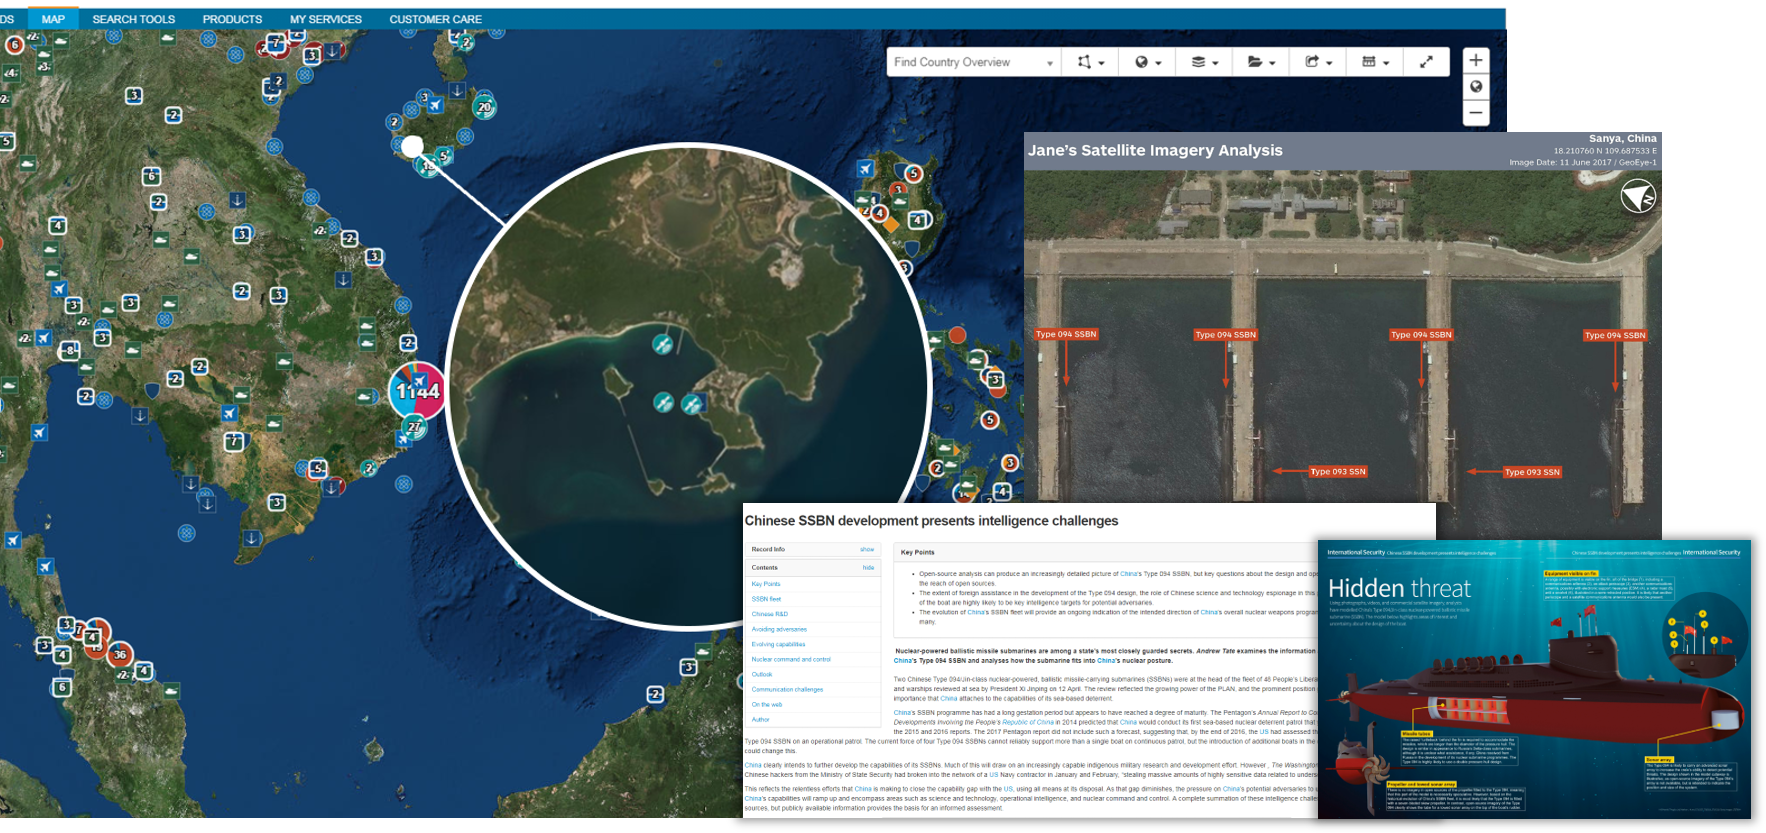 janes-military-threat-intelligence-south-china-sea-imagery4